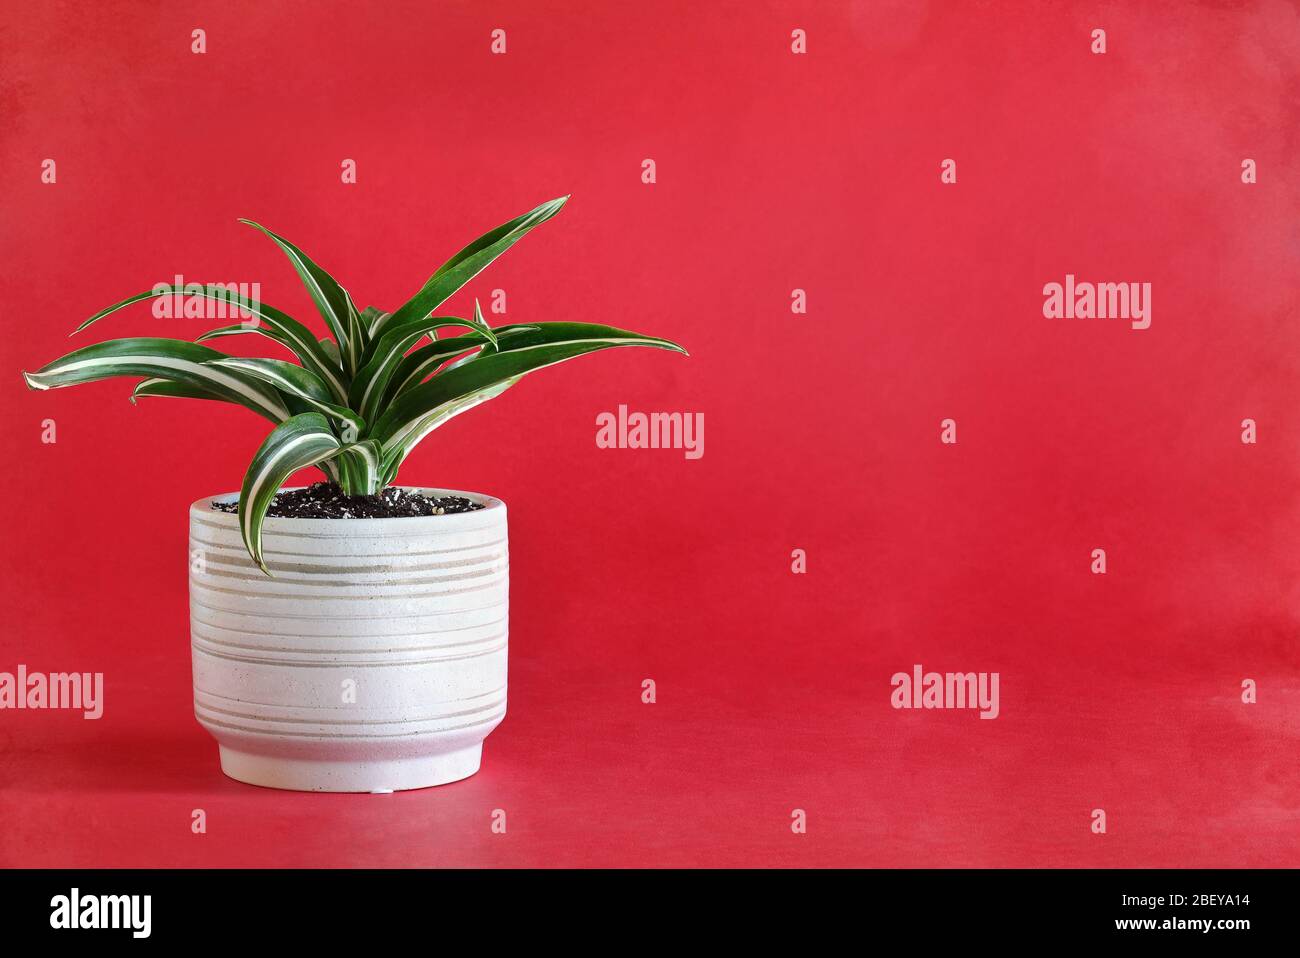 Potted White Jewel, Dracaena Deremensis, houseplant over a red background with free space for text. Stock Photo